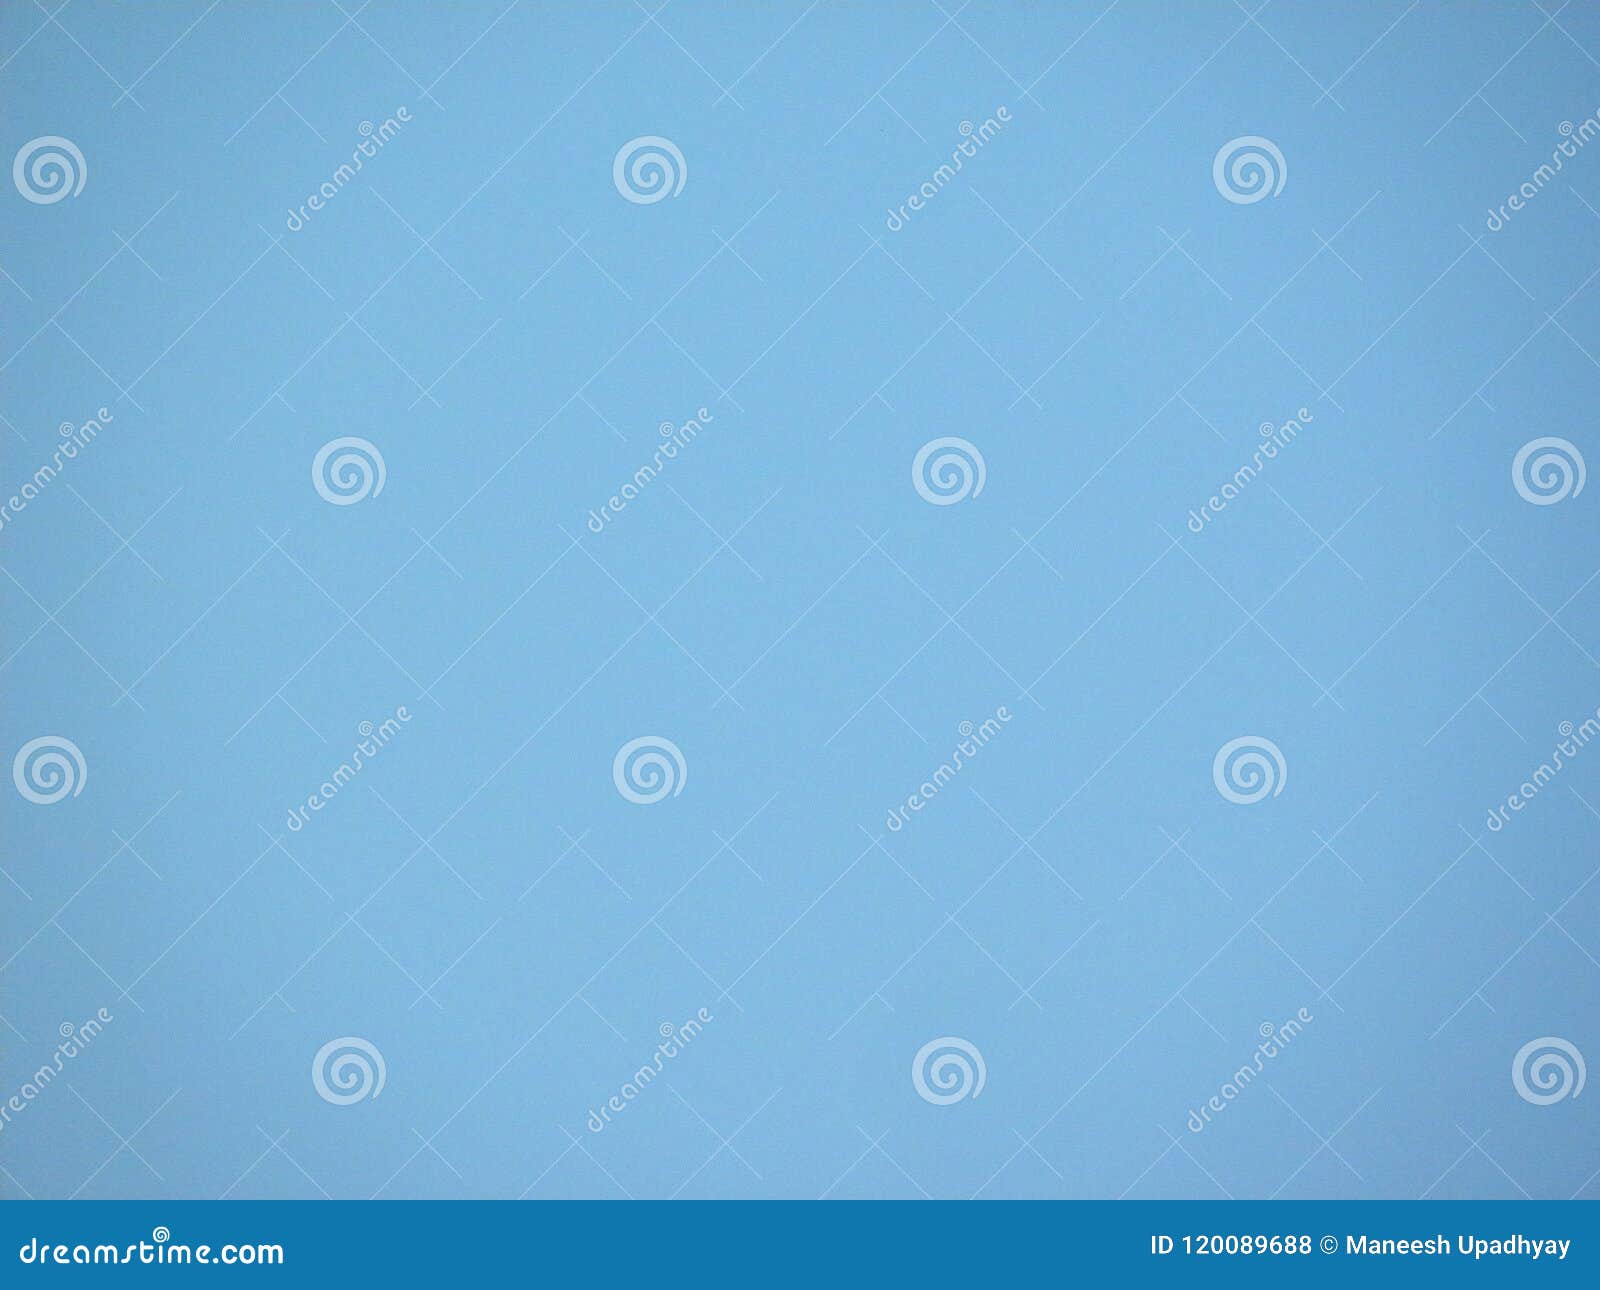 Abstract Light Blue Color Wall Textured Background with White Shades ...